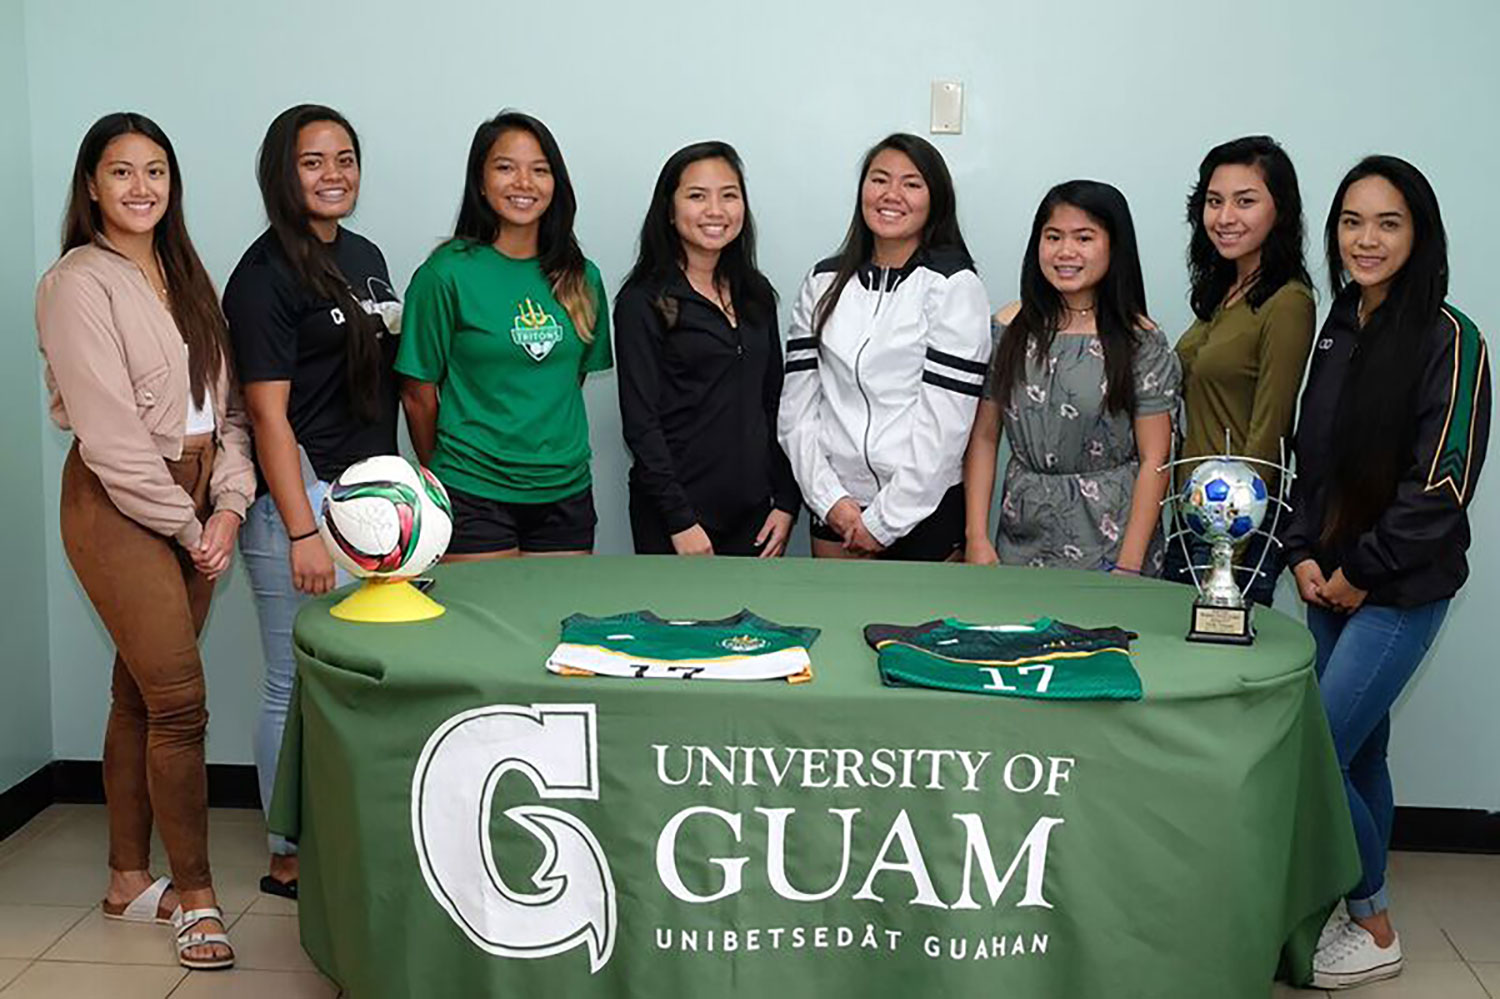 The University of Guam Women’s Soccer Team signed 8 returners from the 2016-17 Guam Football Association Women’s League (Division II) Spring Champions to Athletic Letters of Intent and partial tuition scholarships to play for the Lady Tritons in 2017-18.  Aiyana Shedd played high school soccer at the Academy of Our Lady and won a Junior Achievement award in 2015 while attending Academy. Shedd was a “Green Club” member of the UOG Athletic Academic Clubs (3.50 GPA to 3.99 GPA) in 2016-17.  Koholali’i Maertens attended Hilo High School in Hawaii all of her high school years. She was captain of her high school soccer team as a senior. Koholali’i was named 2nd Team All-Island as a freshman through her junior season and was 1st Team All-Island as a senior. Her high school team won the State Championship when she was a freshman and Hilo went to the state playoffs all four years Maertens played. She was in Key Club (an academic club) from her 7th grade year until she was a junior. Maertens was a track star at Hilo High School as well, winning the state 400 meter dash as a junior and 4X4 Relay and 4X1 too. Hilo was state track champions during her junior and senior years. She also won the state discus throw her senior year.  Elisha Benavente played high school soccer at Harvest Christian Academy where she was captain of the team as a senior and was 2nd Team All Island as a junior. She was an A/B Honor Roll student during her junior and senior years and was captain of the girl’s basketball team as a junior and senior. Elisha scored both goals in UOG’s 2-1 win over Select Care/ISC Team Slay in the Championship Match of the Guam Football Association’s Women’s League (D2).  Aiesha Castro played for George Washington High School where she was named 2nd Team All Island as a senior and on the All-Defensive Team. She was on the winning team for the All-Island All-Star game as a senior as well. George Washington finished in the Top Four teams on the island each year of her high school career and won the 2014 and 2016 Pre-Season Tournament for the Guam Football Association. She was an Honor Roll student from her freshman year through her senior year.  Philana Lopez played for St. Paul’s Christian School where she was captain of the team from her sophomore season through her senior year. As a senior she was named Honorable Mention All-Island. She won two championships as a club team member of Quality Distributors Women’s Team. In high school, Lopez was a National Honor Roll Society of Scholars member. She was also a member of the Guam National Team as a U13 and U14 player.  Shaeina Torres played at Simon Sanchez High School where they finished 3rd on the island as a senior. Torres won multiple championships in the Robbie Webber League playing for several club teams including the Crushers, Islanders and Dededo Soccer. She was named captain of the girl’s basketball team at Simon Sanchez from her freshman year until her senior season. Torres has been a Regent Scholar for every semester she has attended UOG and was a member of the Triton Athletic Academic Clubs as a “Triton” (4.00 GPA Club). She was voted the Most Valuable Player on the UOG Women’s Soccer Team in 2016-17 and was named the “Student-Athlete of the Year” at UOG for 2016-17.  Adrianne Flores played high school soccer at St. Paul’s Christian School as both a middle schooler and in high school. She played for the Islanders club team as a youth and was the Junior Golf Club Champion. She was a Honor Roll member in high school and also played volleyball and golf at St. Paul’s.  Ashley Borja attended the Academy of Our Lady for high school and was a member of the Quality Mom’s club team and the Southern Cobras. She was a Dean’s List student in 2014 and Psych Club Officer. She was a Unity and Diversity Award recipient and was a Triton Athletics Academic Club member at the “Green Club” level (3.50 GPA to 3.99 GPA). Borja was also captain of the Academy’s softball team and finished 3rd in softball on the island as a junior and senior.  The Lady Tritons were 4-2-0 last spring season when they won the GFA Women's League (D2) Championship and went 6-0-0 playing in the GFA Women's 7 On 7 League during the Fall of 2016.